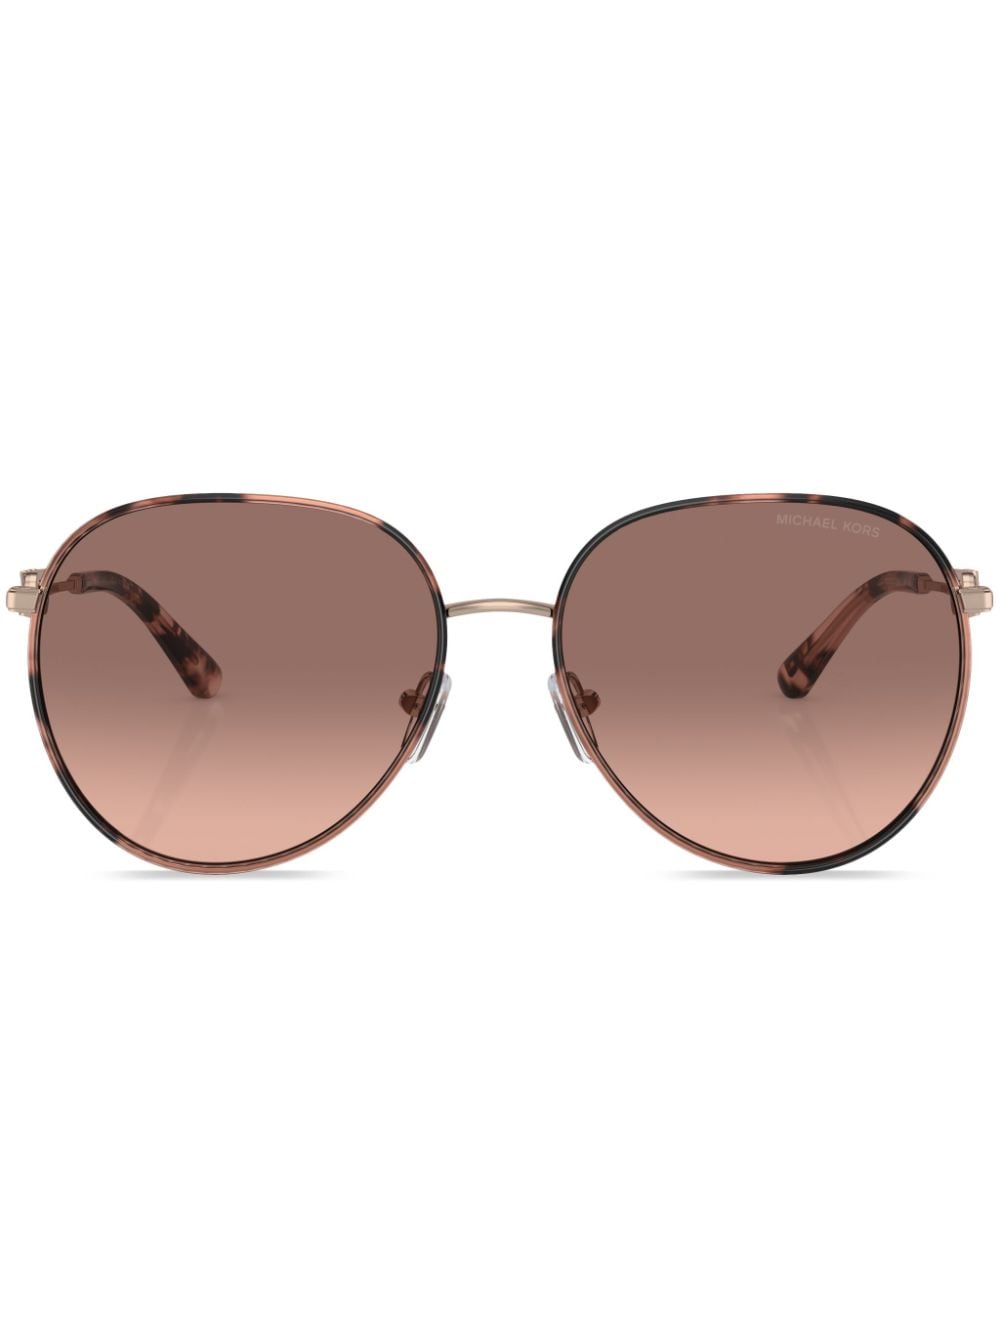 Michael Kors Empire Round-frame Sunglasses In Pink